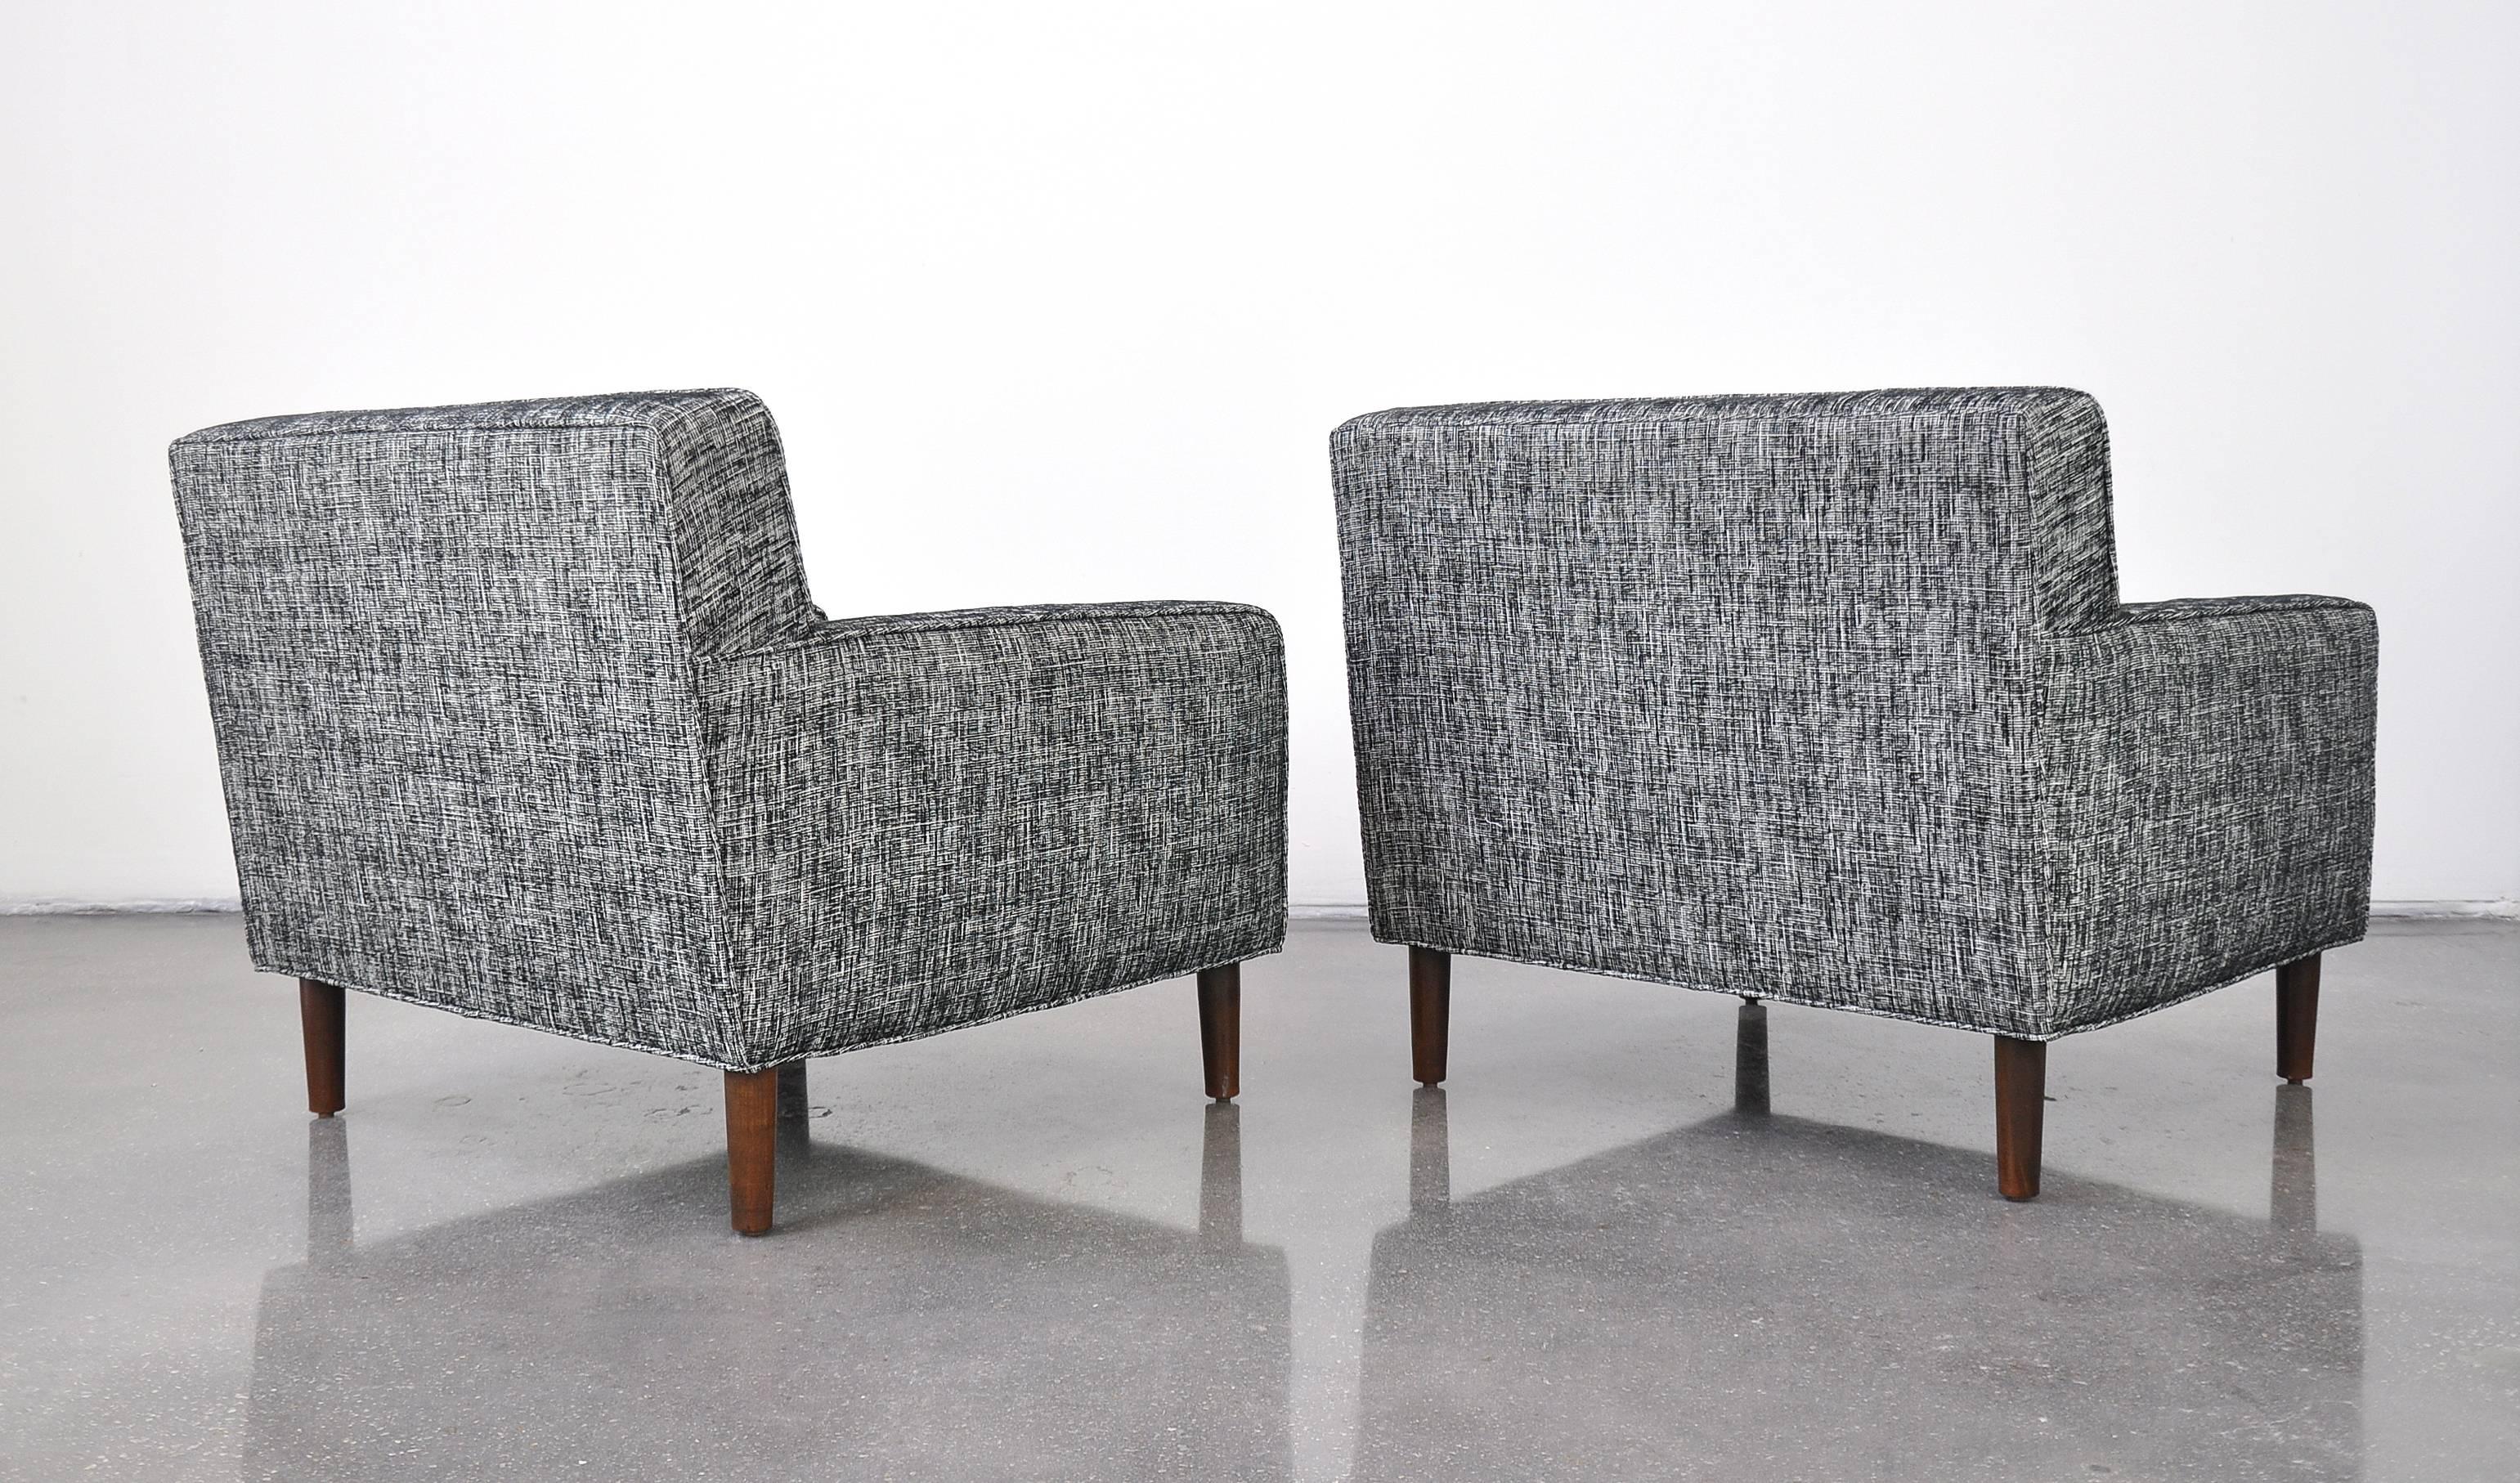 Mid-20th Century Pair of Edward Wormley for Dunbar Tufted Lounge Chairs